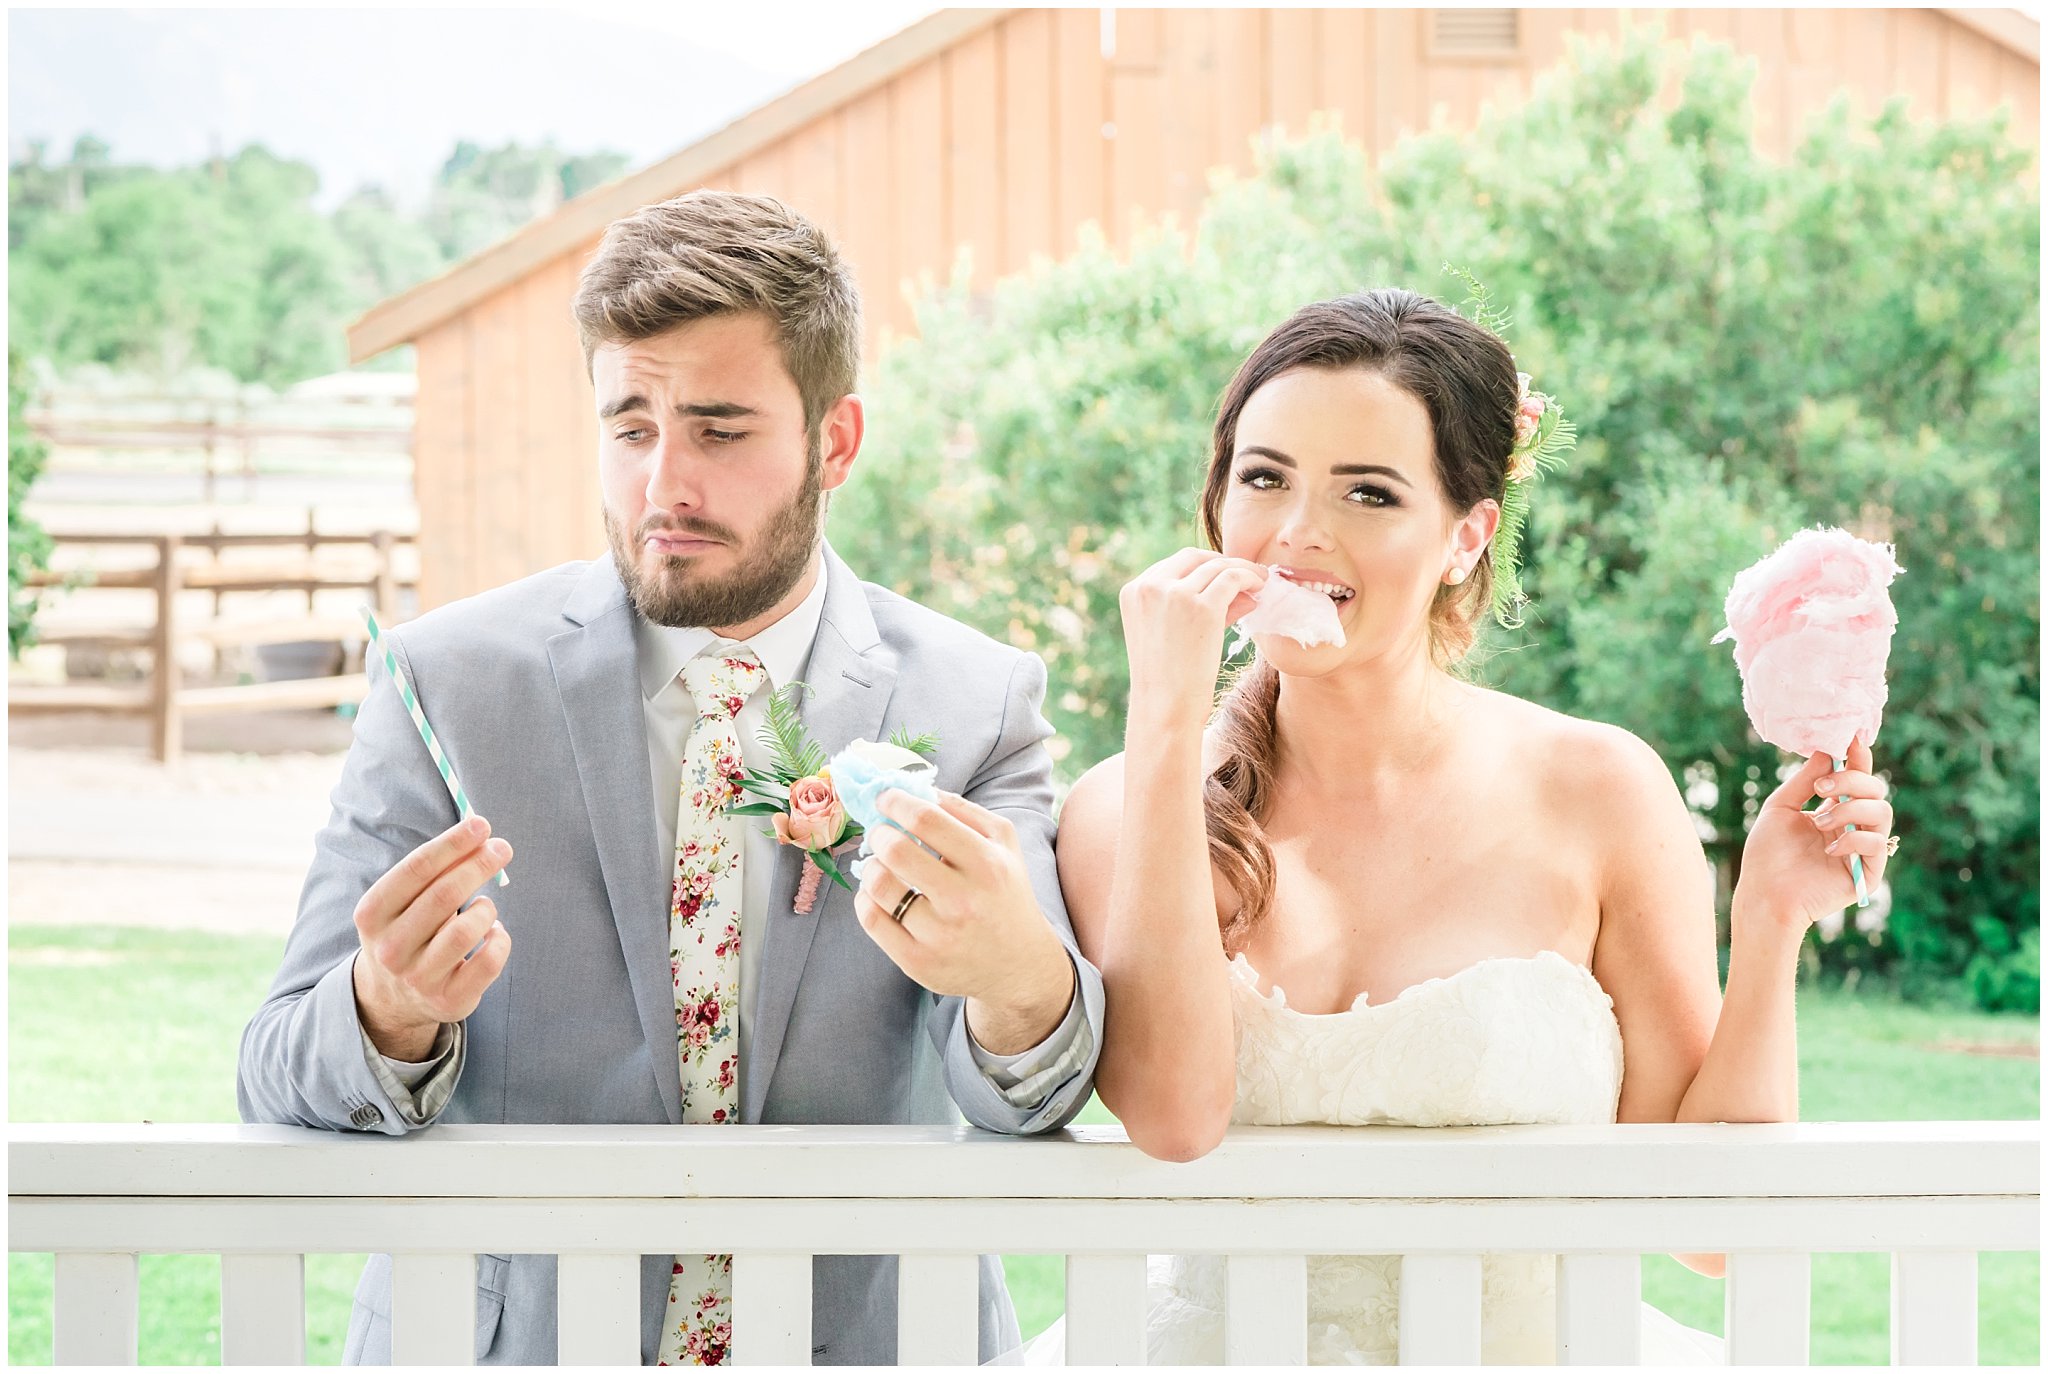 Bride and groom eating cotton candy | This is the Place Heritage Park | Green and Pink Garden Wedding | Jessie and Dallin Photography